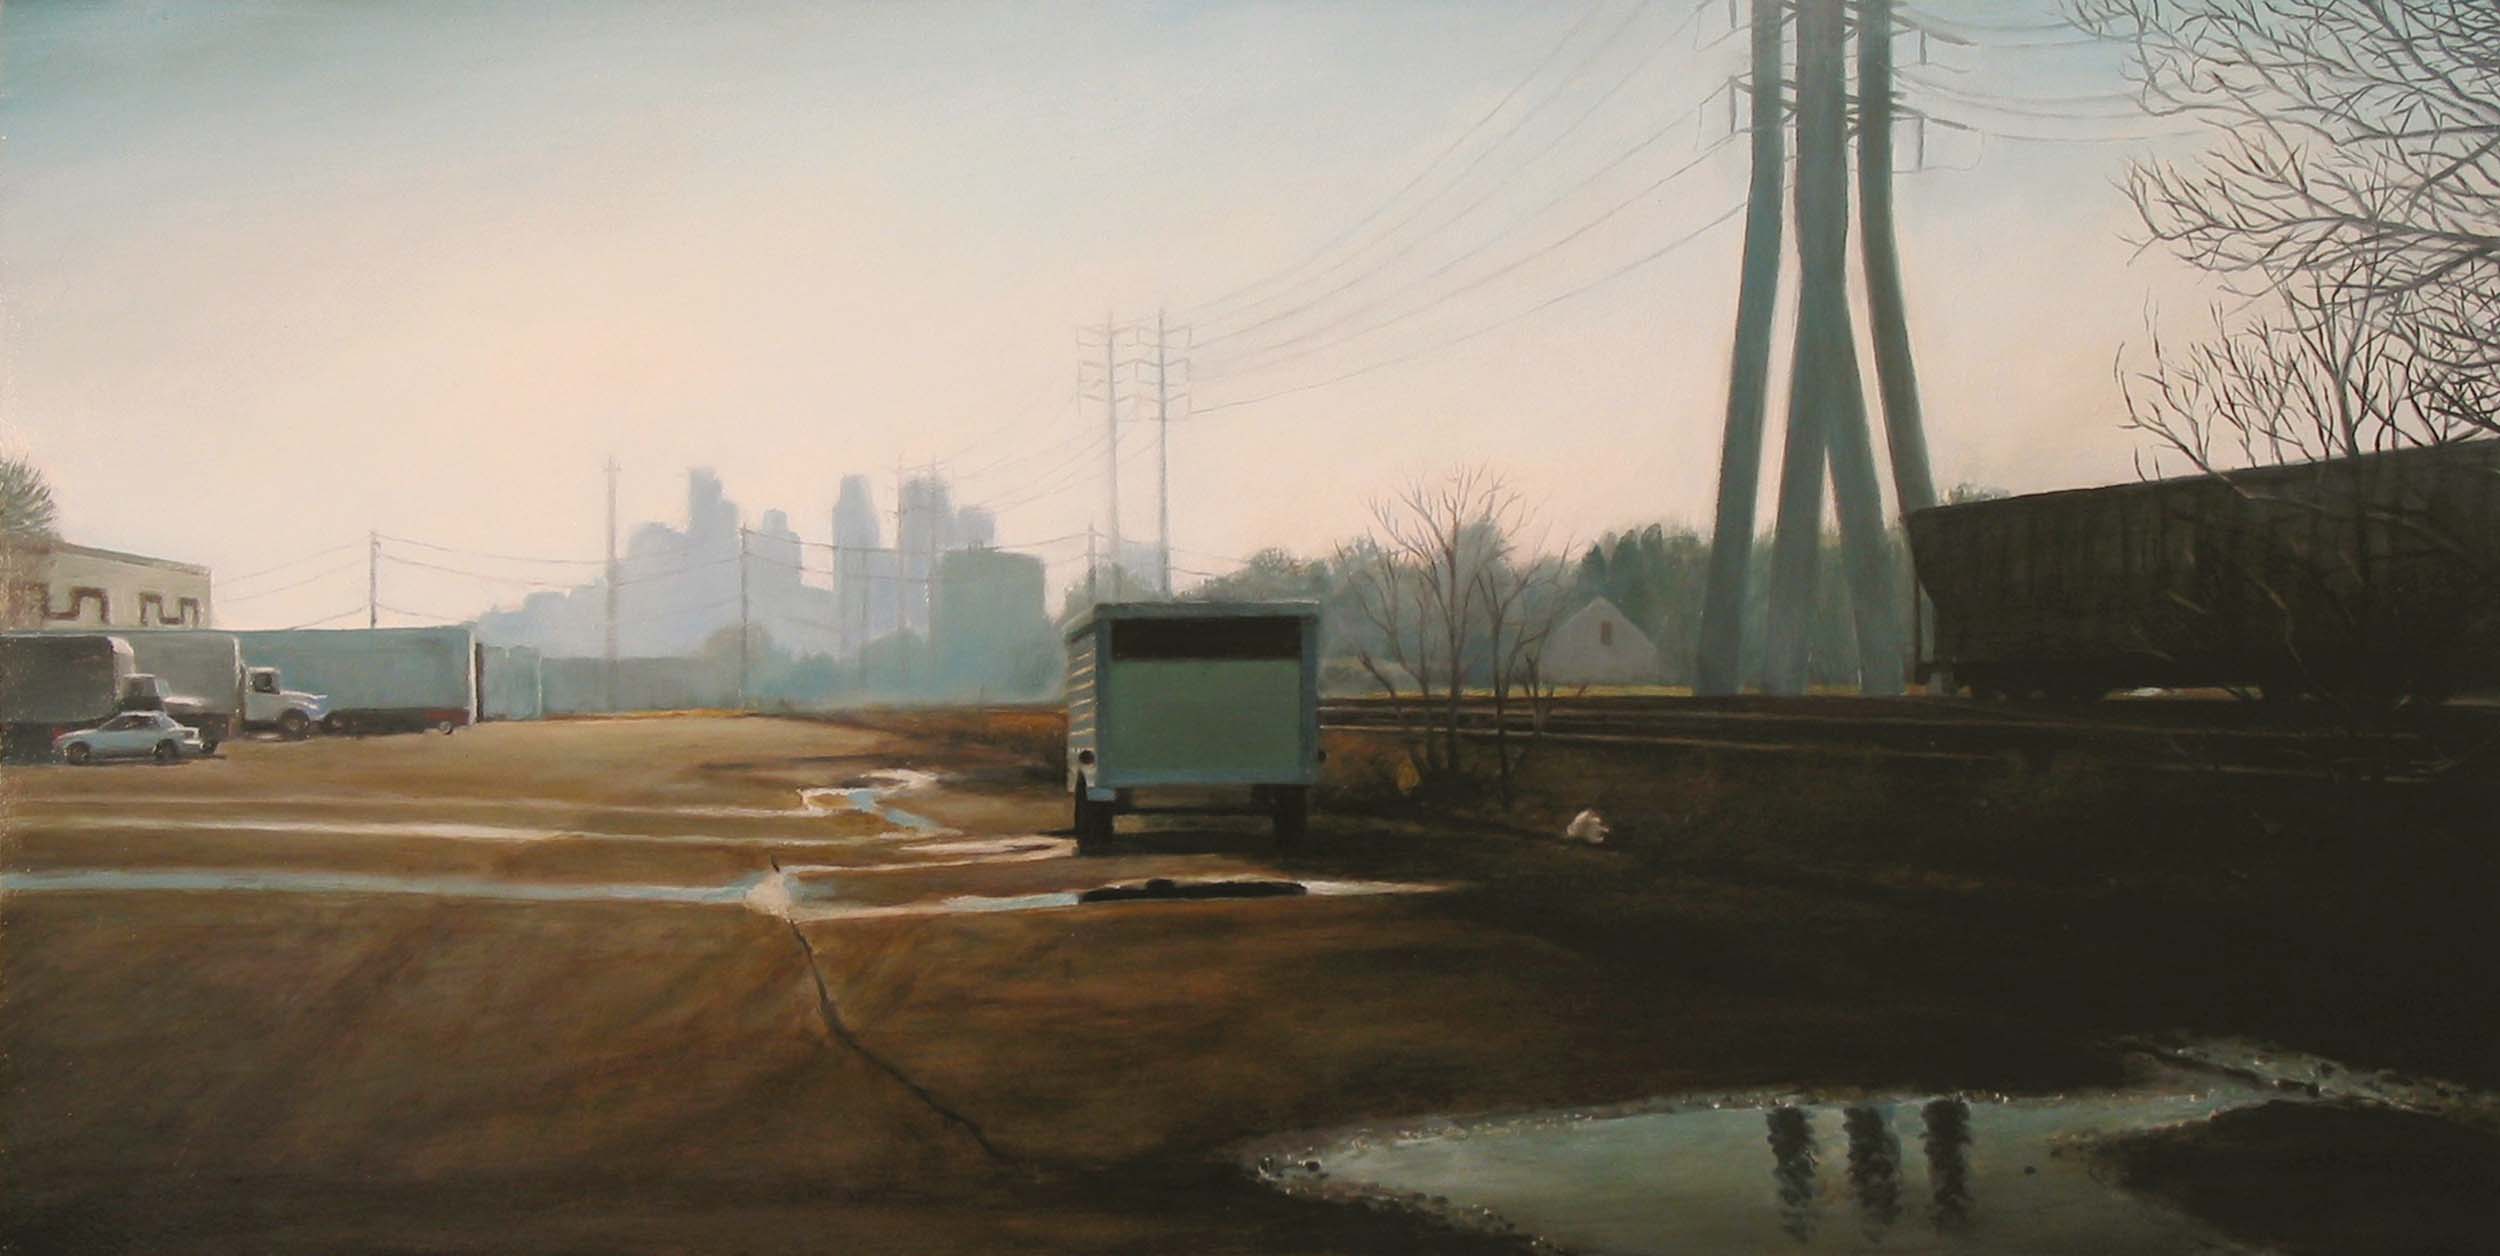   Parking Lot by Railroad Tracks   2006  Oil on panel  10 x 20 inches       